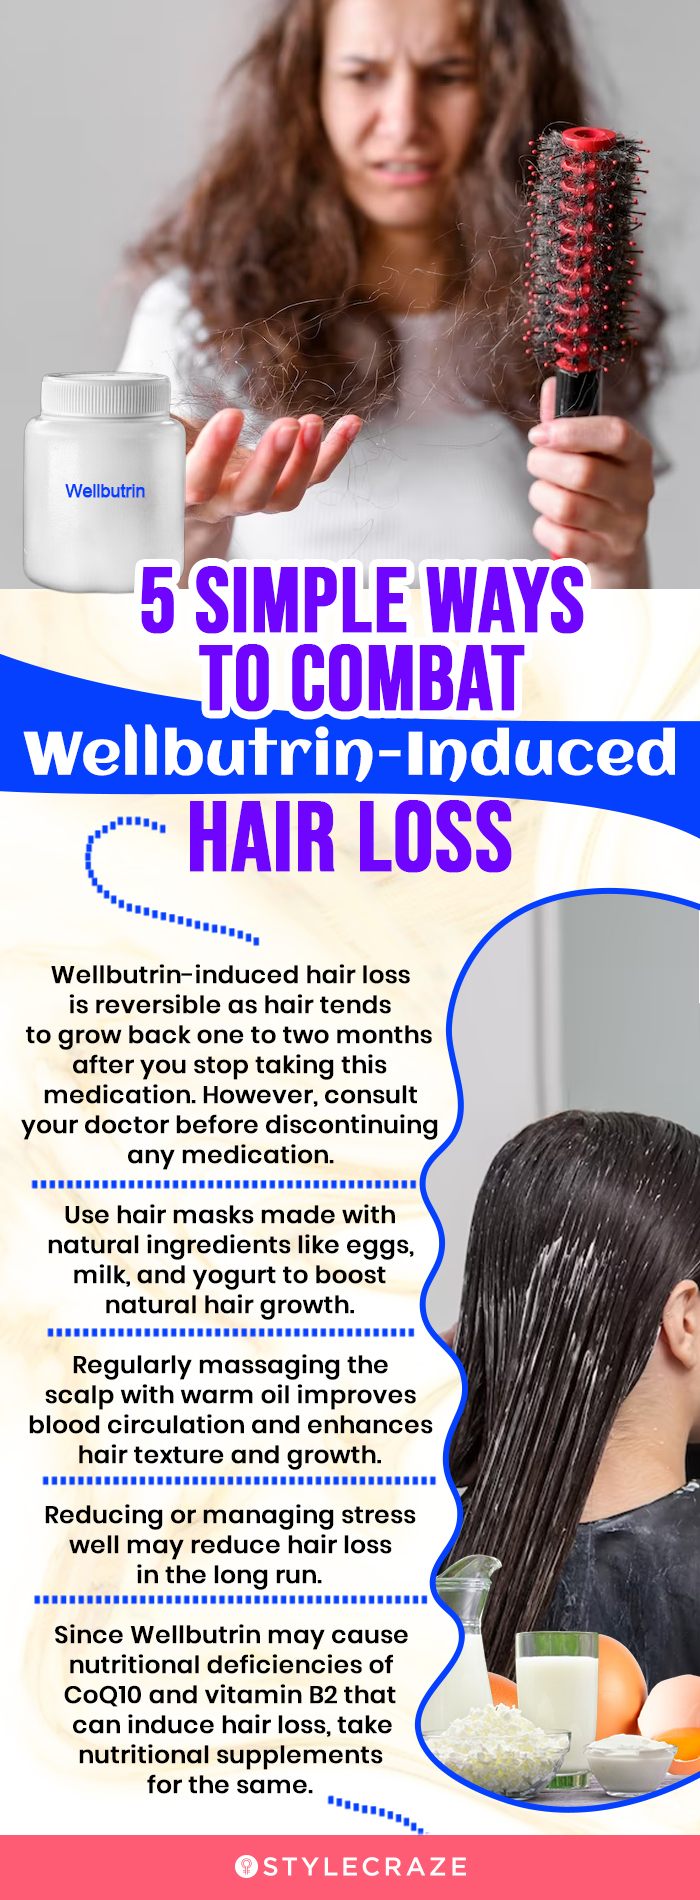 5 simple ways to combat wellbutrin-induced hair loss (infographic)